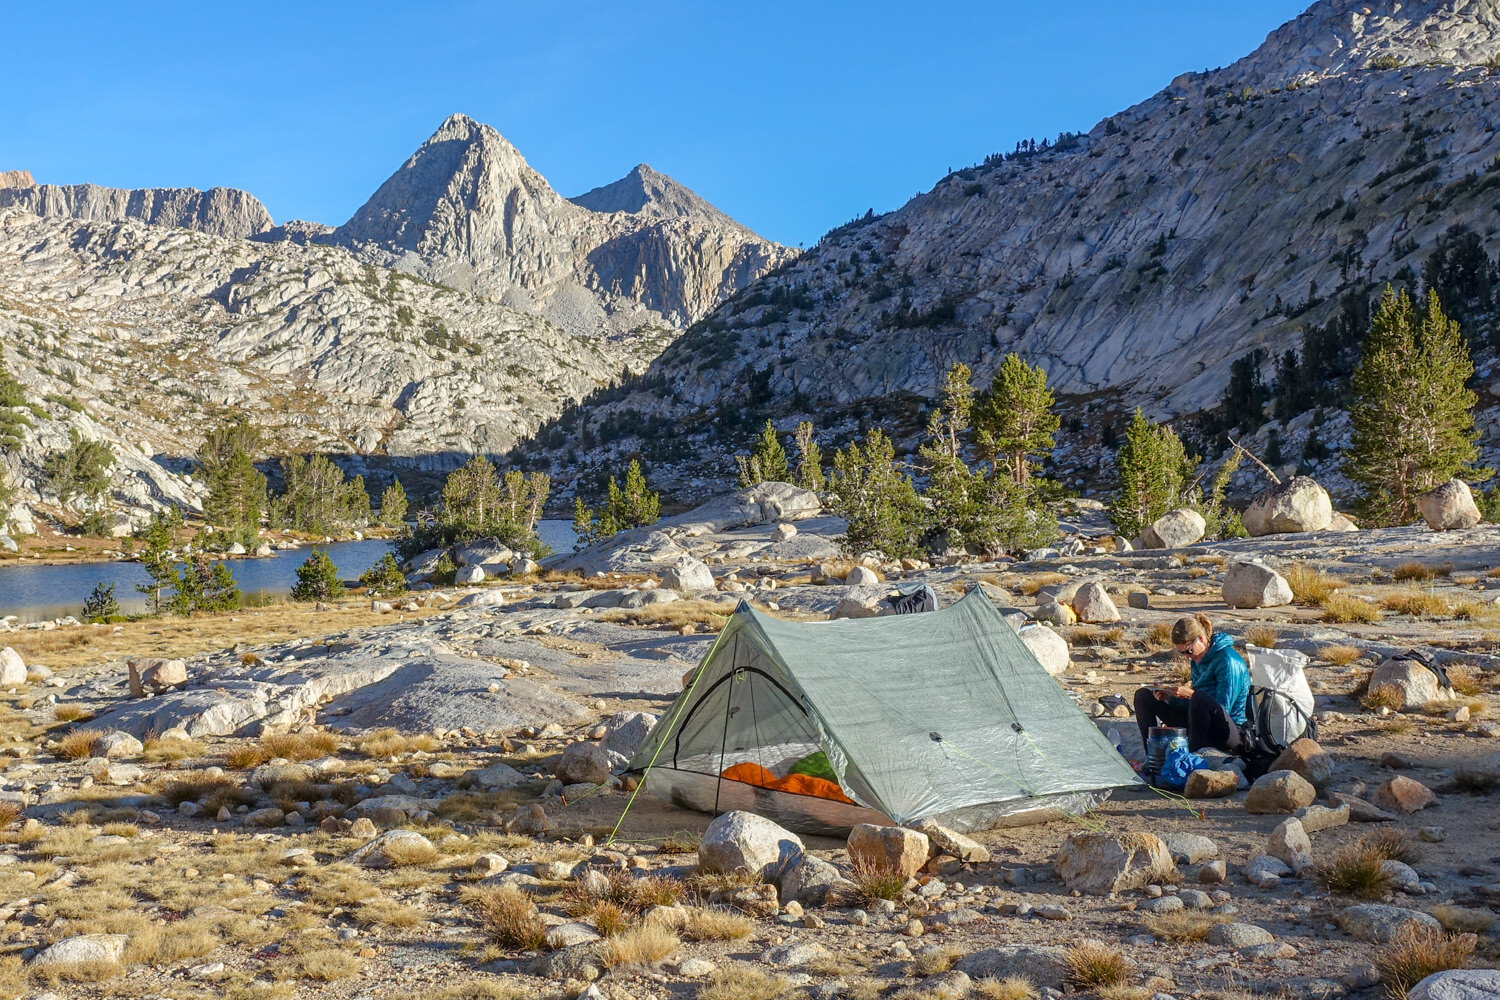 The ZPacks Triplex is our go-to ultralight tent for long distance hikes, like the John Muir Trail.